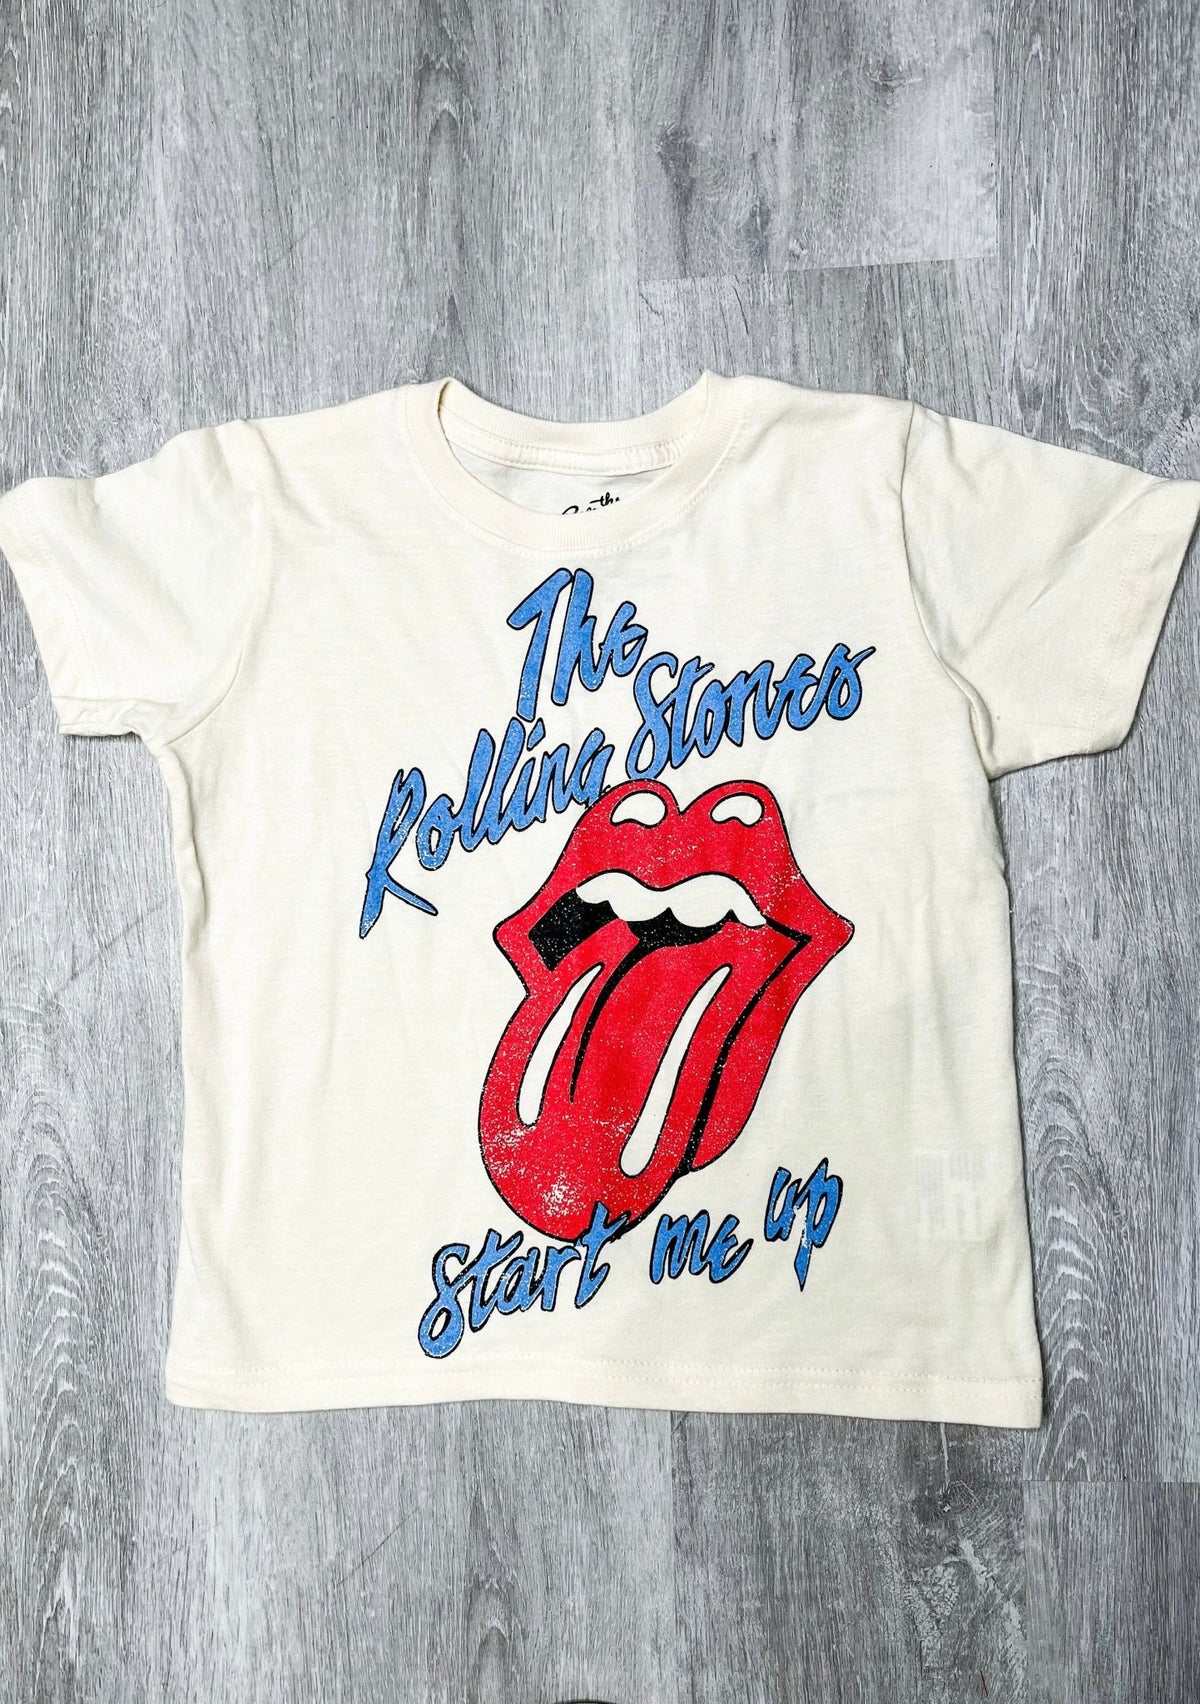 Kids Rolling Stones start me up t-shirt off white - Trendy Band T-Shirts and Sweatshirts at Lush Fashion Lounge Boutique in Oklahoma City